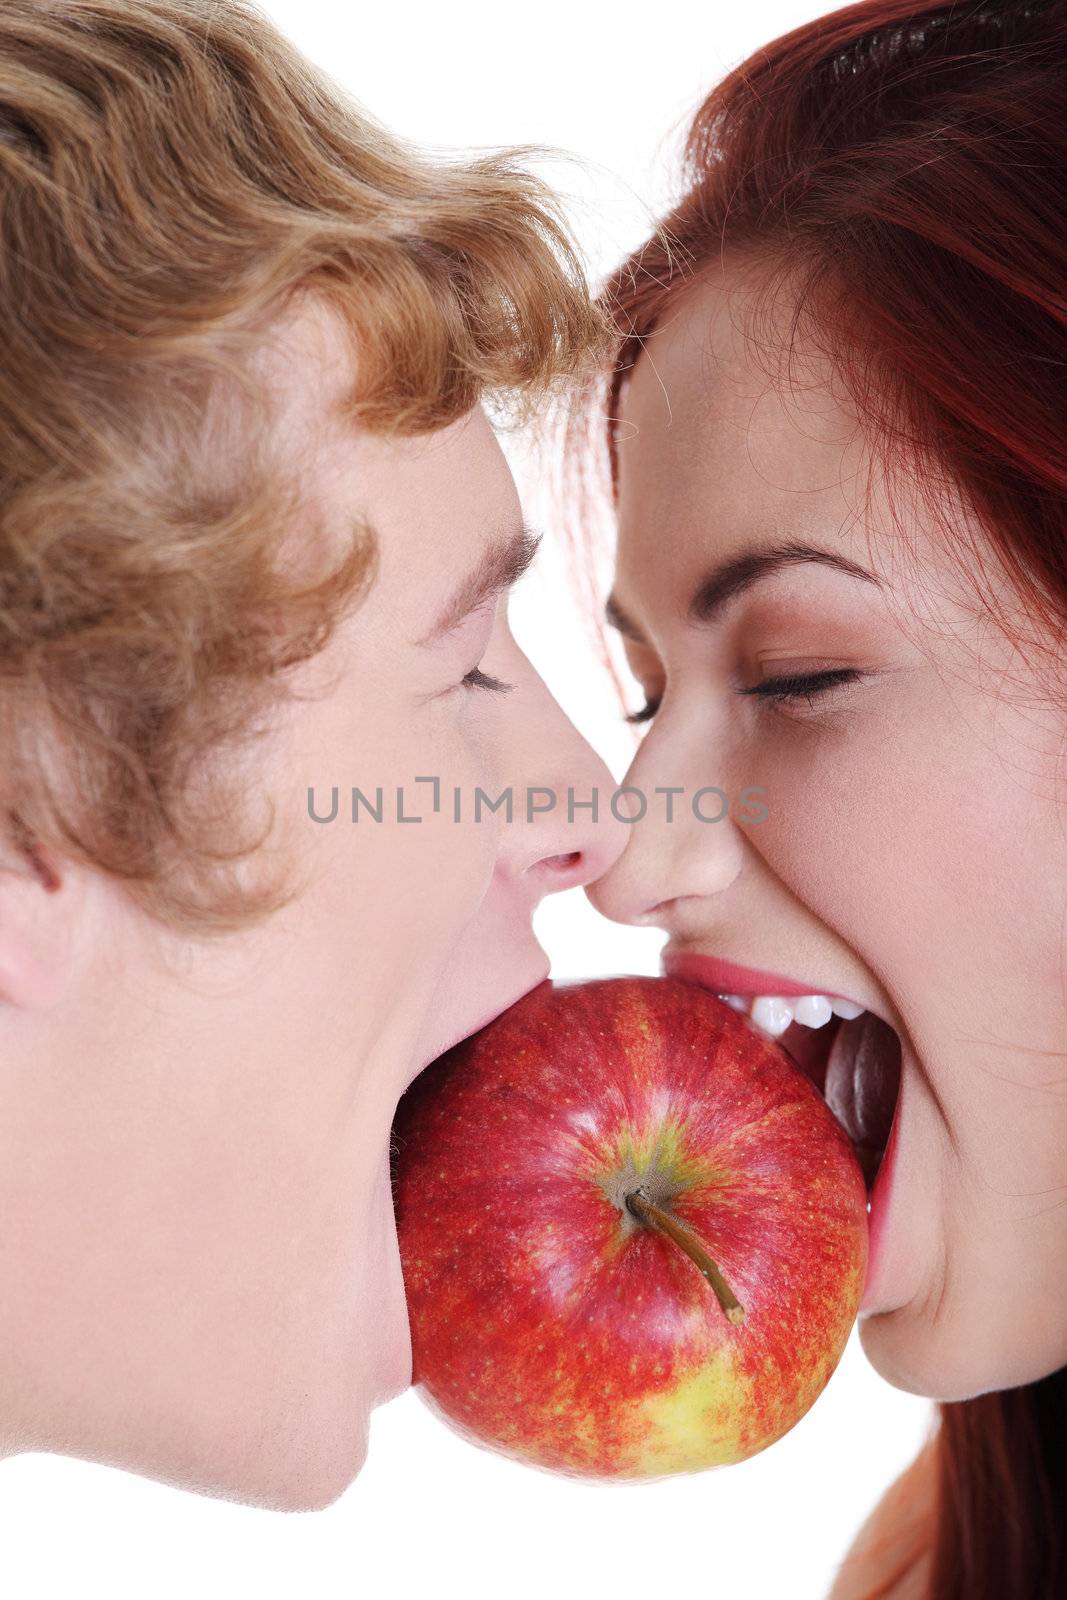 Closeup of young caucasian coupe biting apple over against white background.